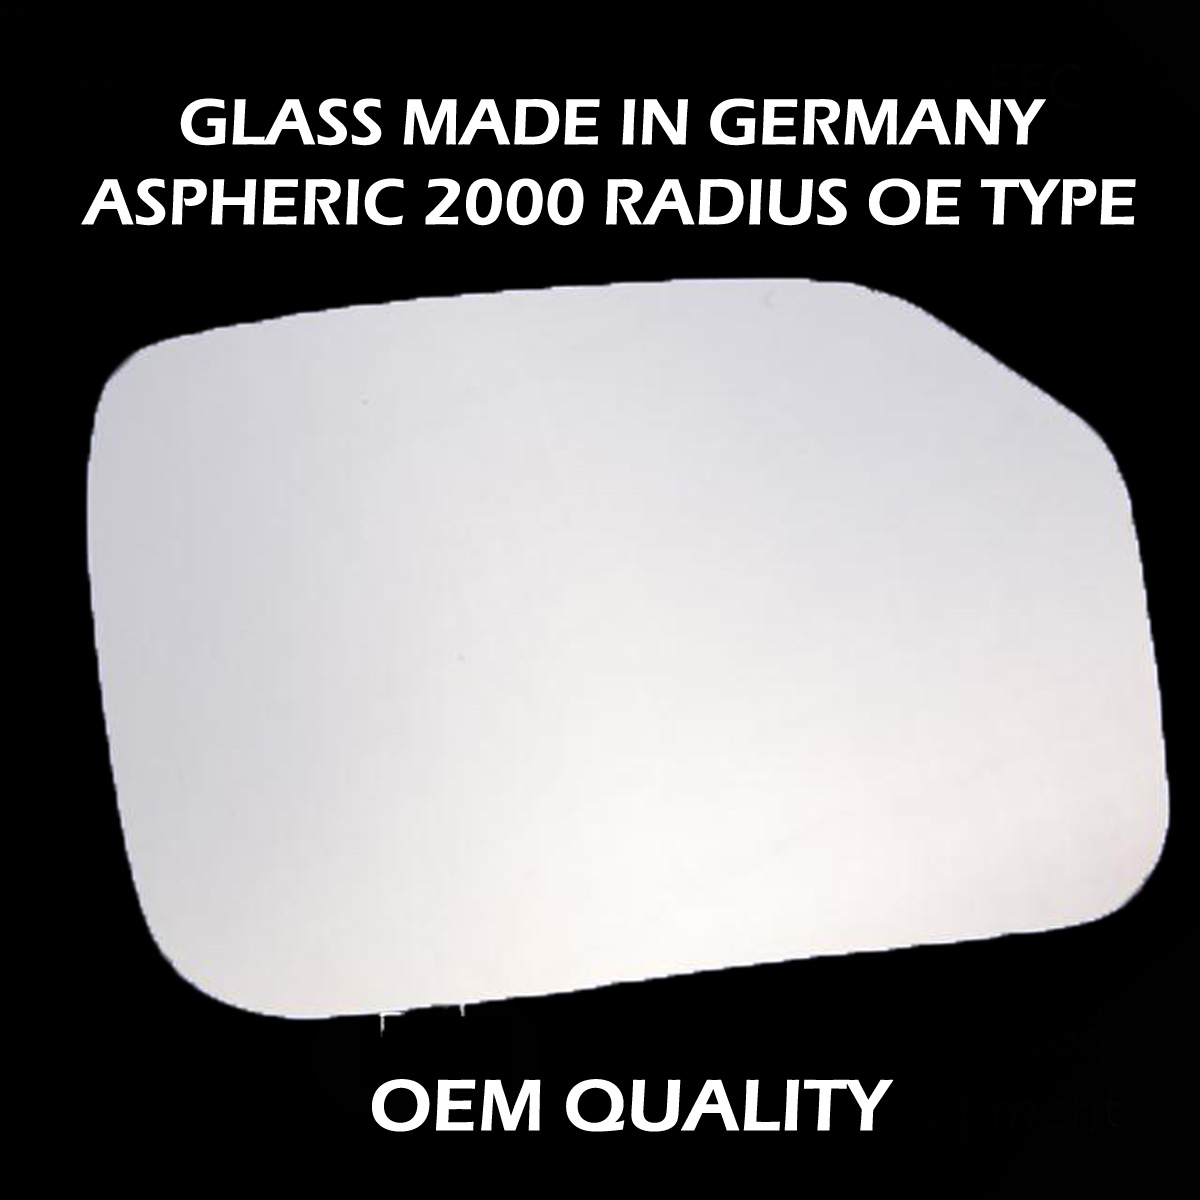 Peugeot 106 Wing Mirror Glass LEFT HAND ( UK Passenger Side ) 1991 to 2004 – Convex Wing Mirror